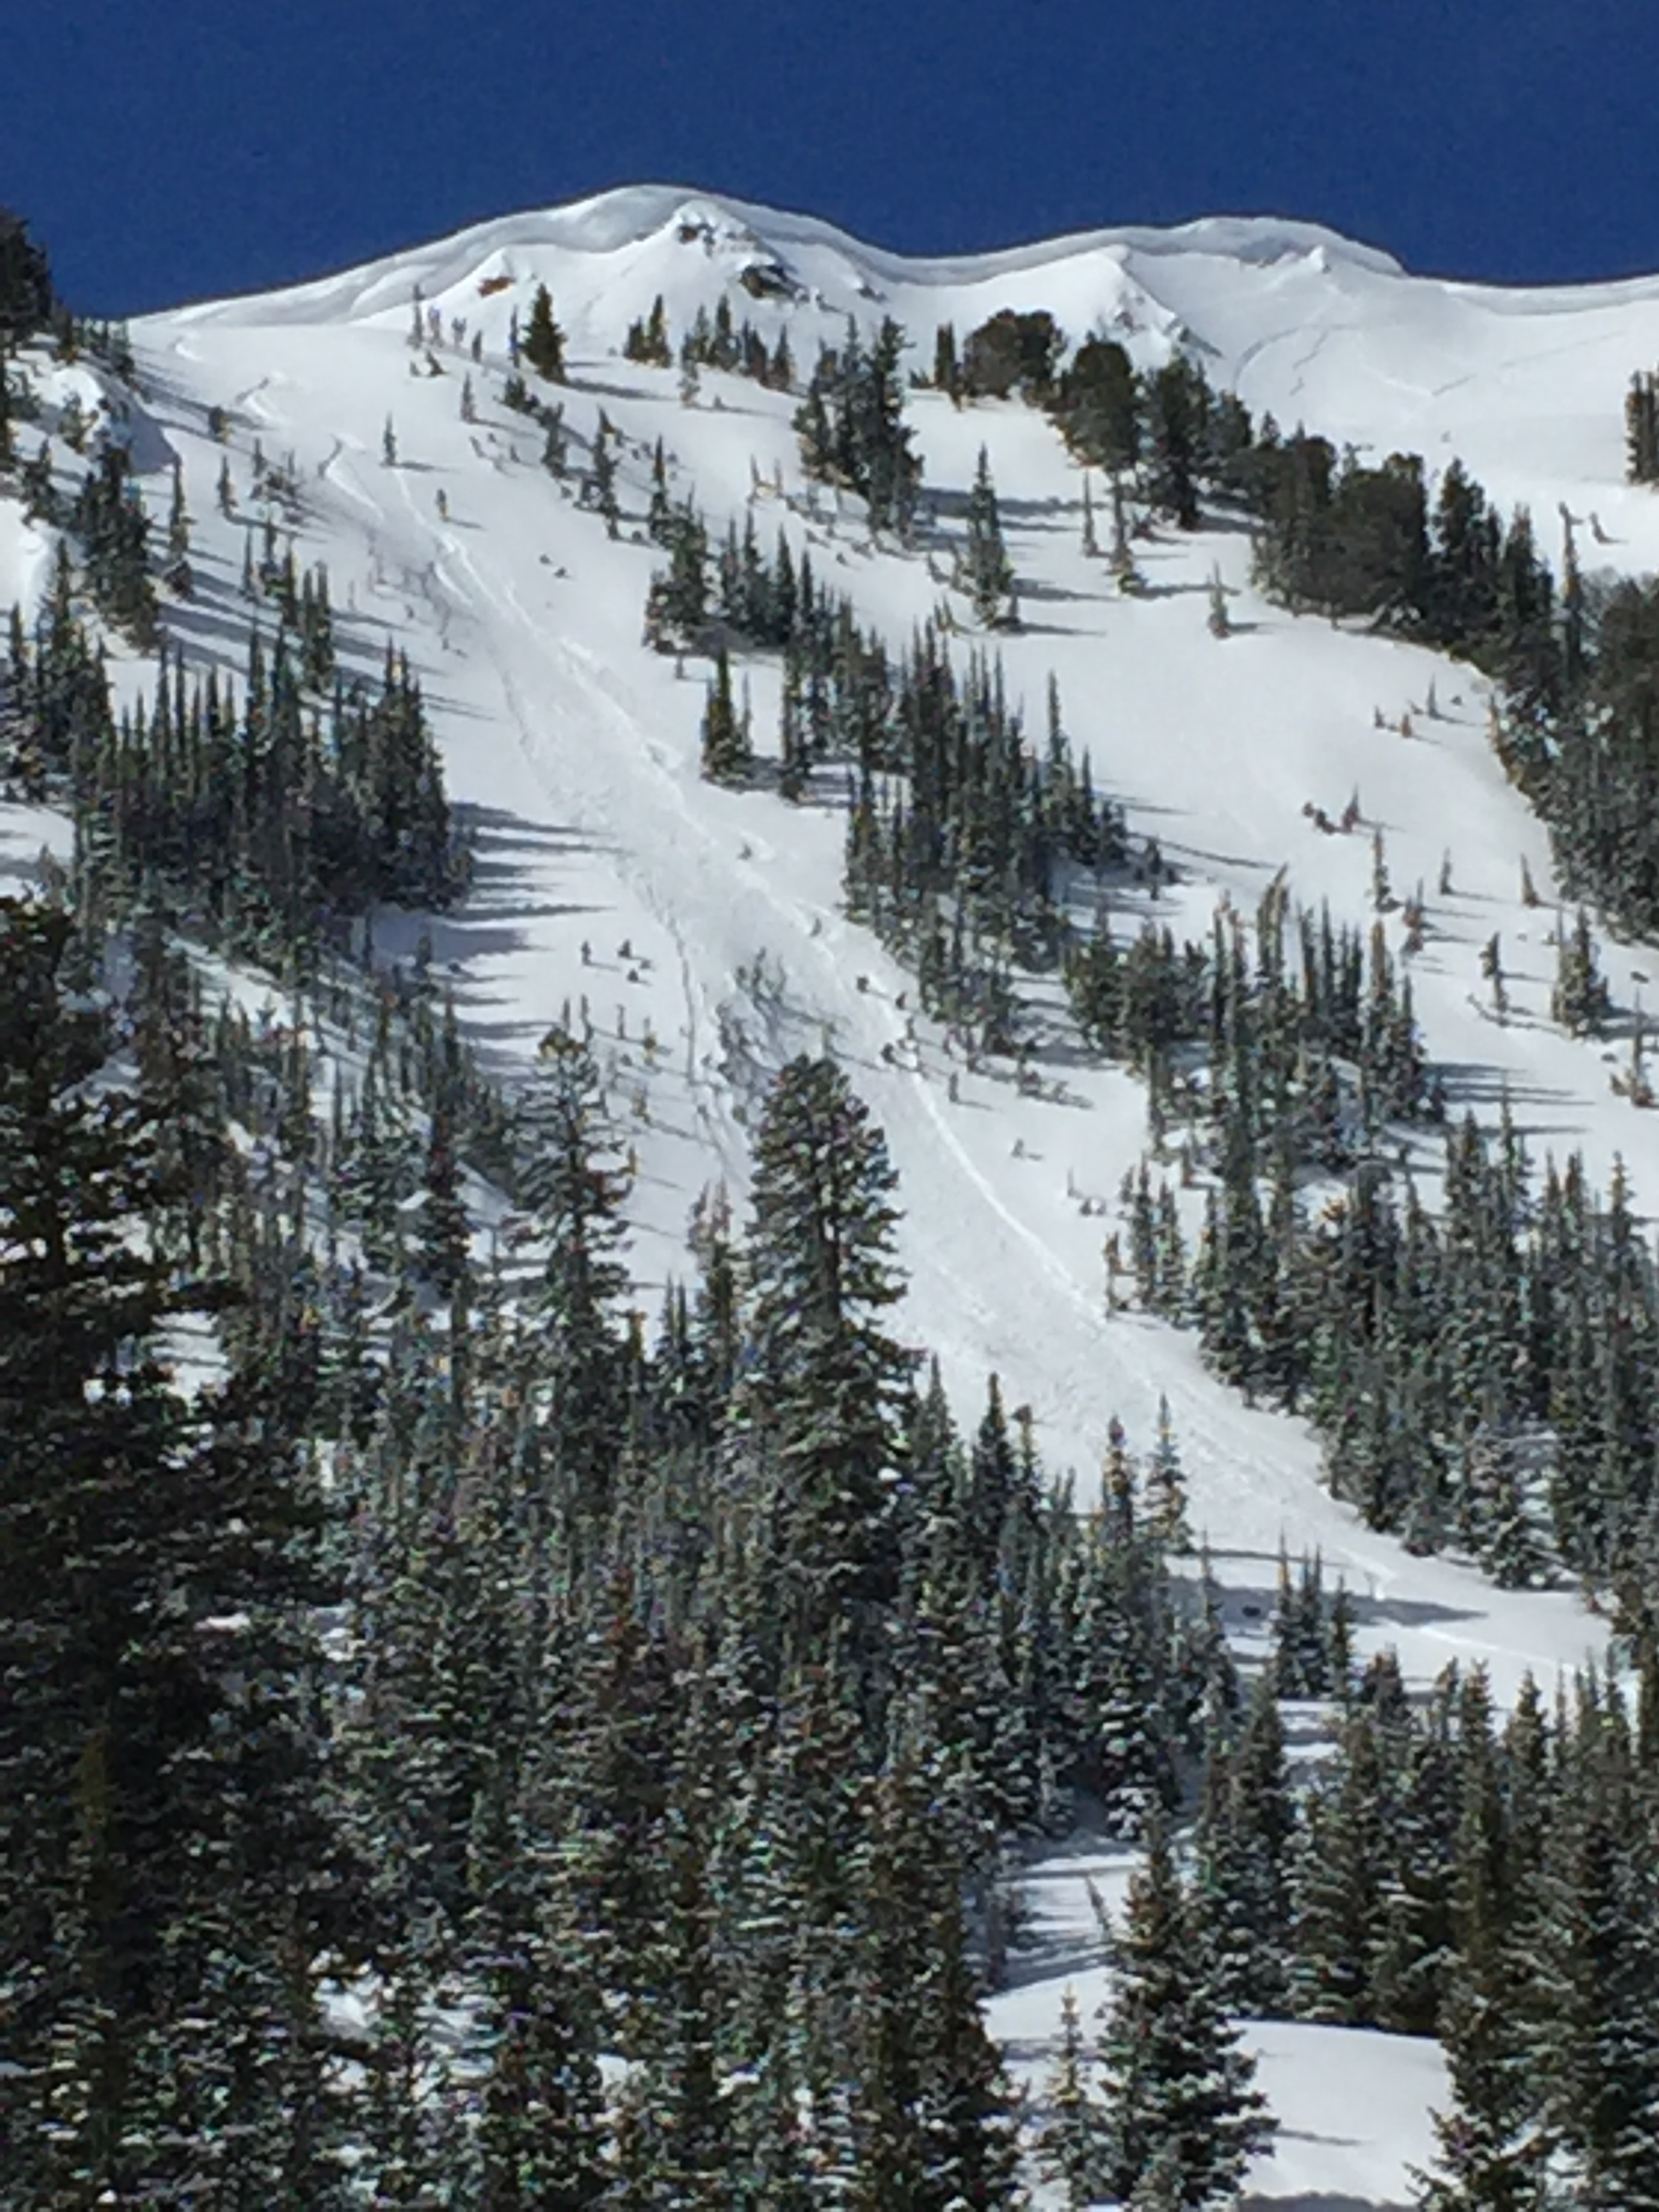 Skier triggered avalanche - Cooke City